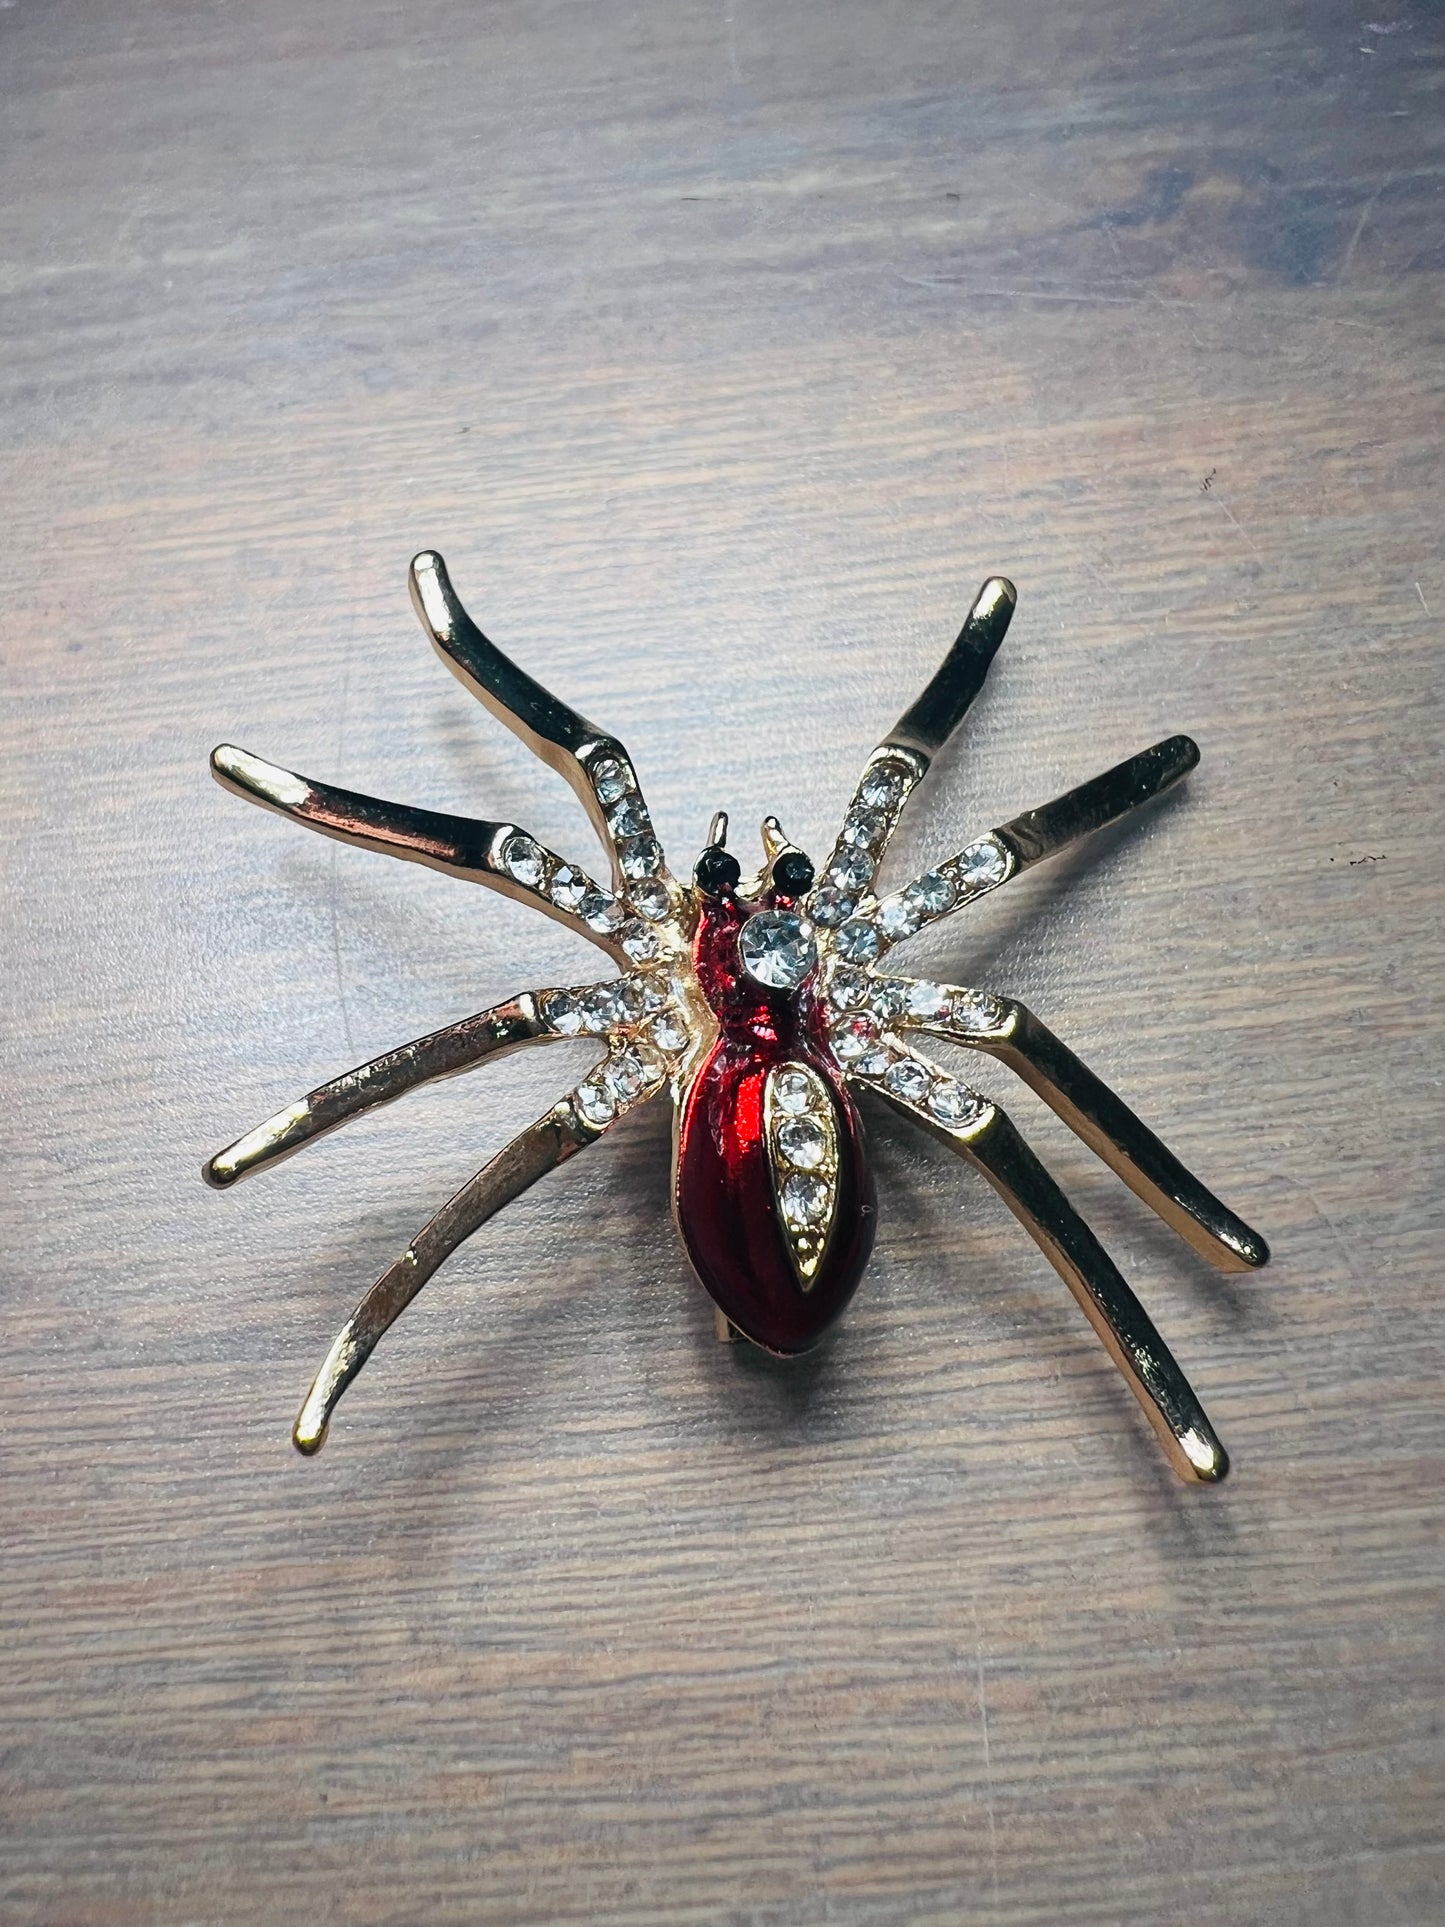 Spider Brooch - Blue and Clear